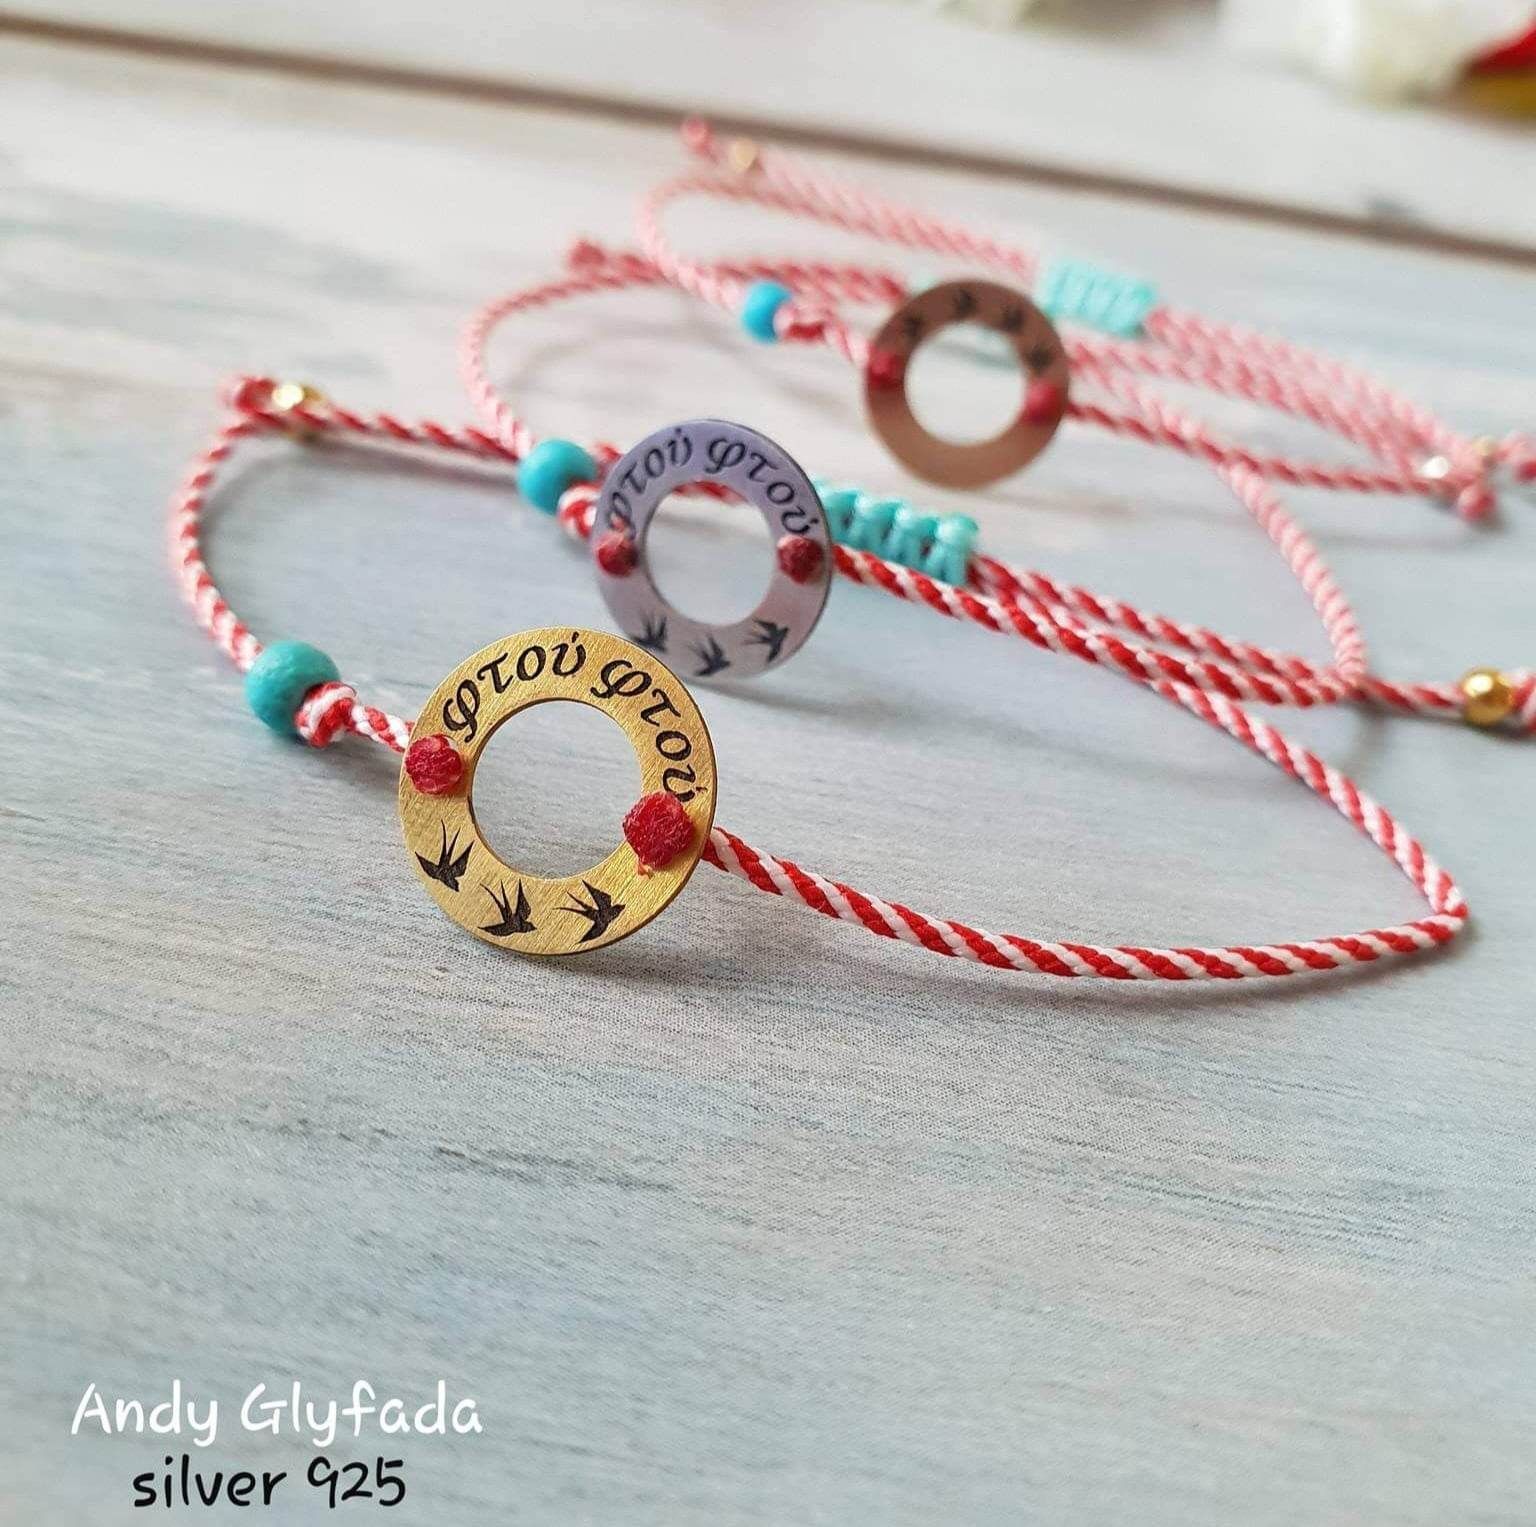 Handmade March Bracelet Sterling Silver 925 18K Gold Plated or Rhodium Plated Swallows Round with Macrame Cotton Cord and Turquoise Stone